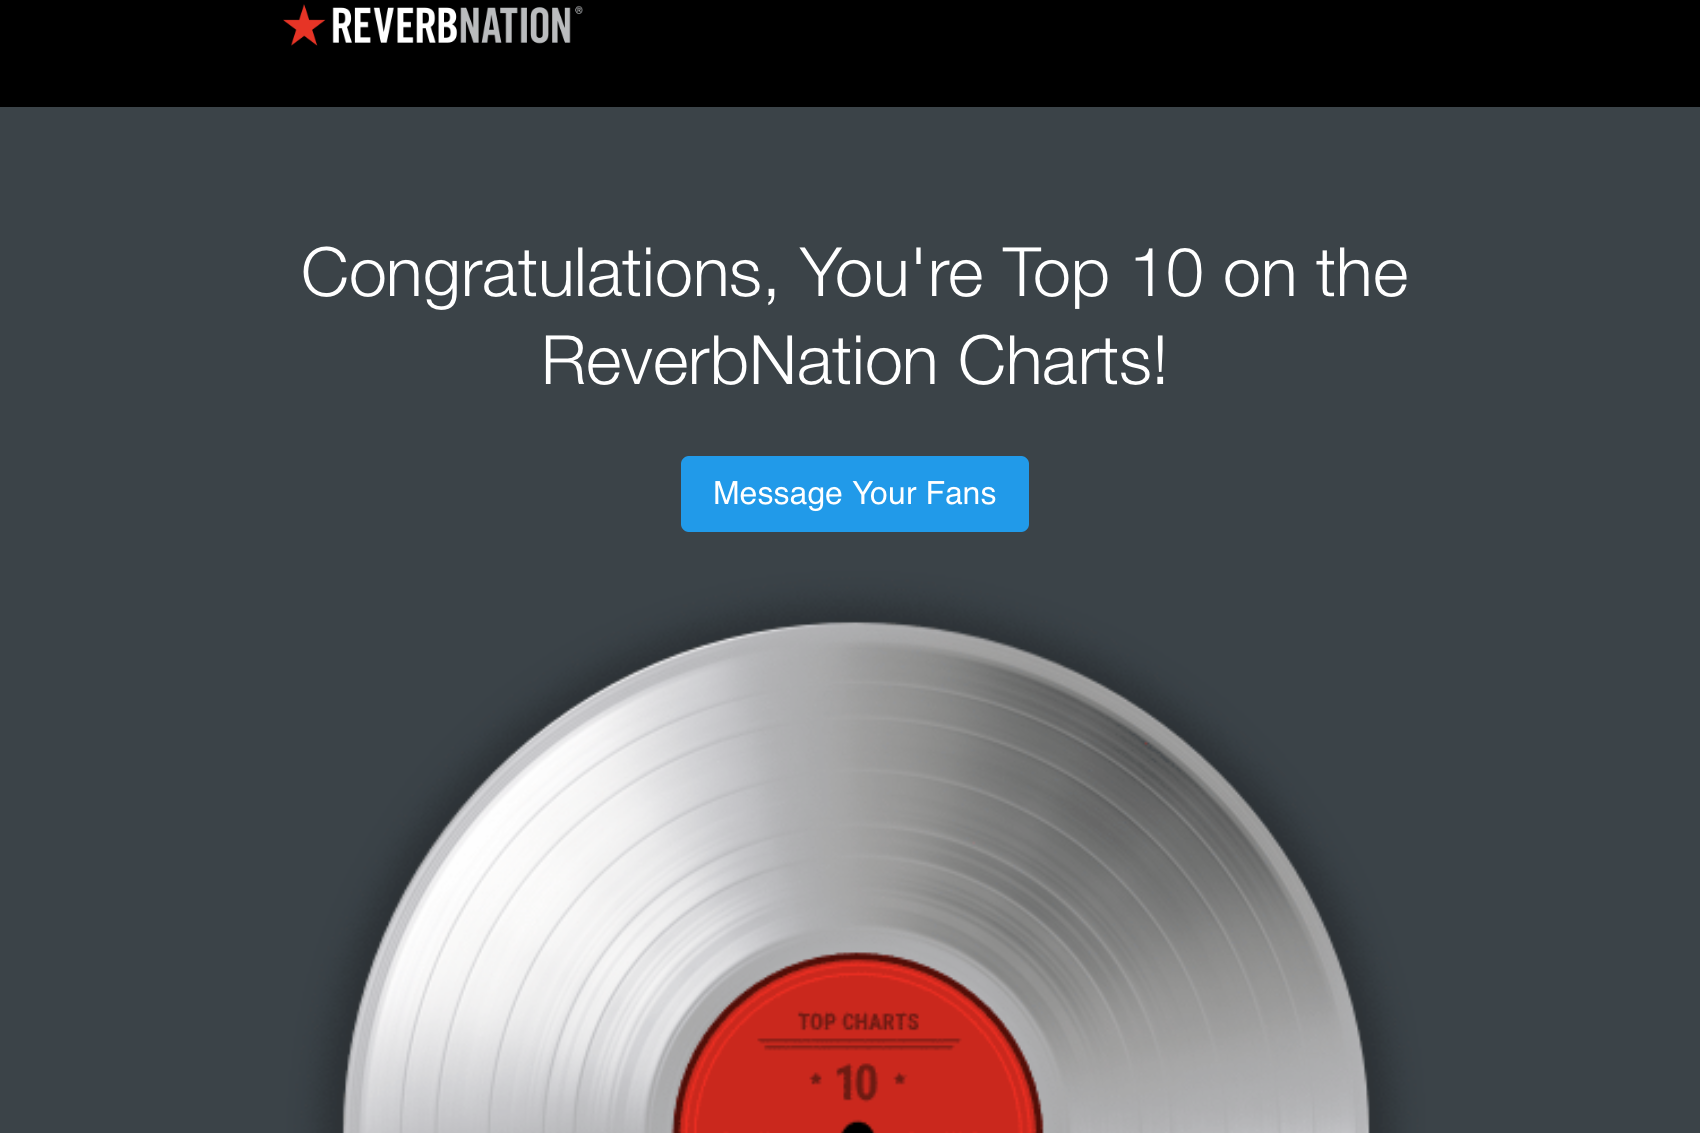 Rob Davis Band is Top Ten on ReverbNation Charts